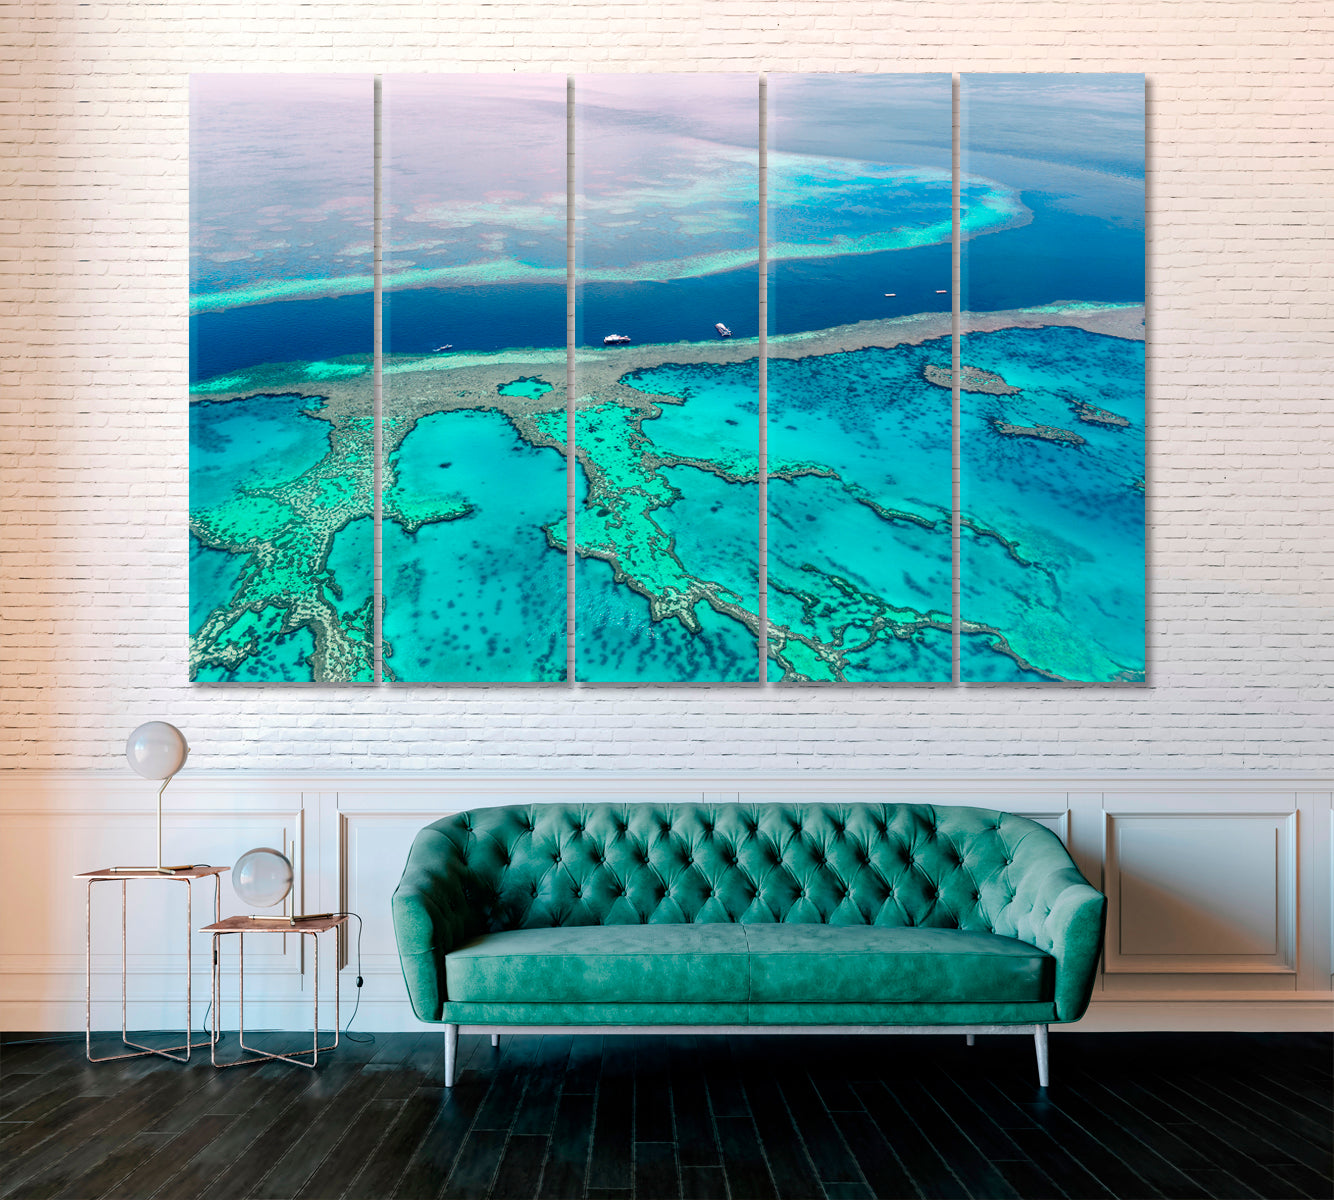 Great Barrier Reef Canvas Print ArtLexy 5 Panels 36"x24" inches 